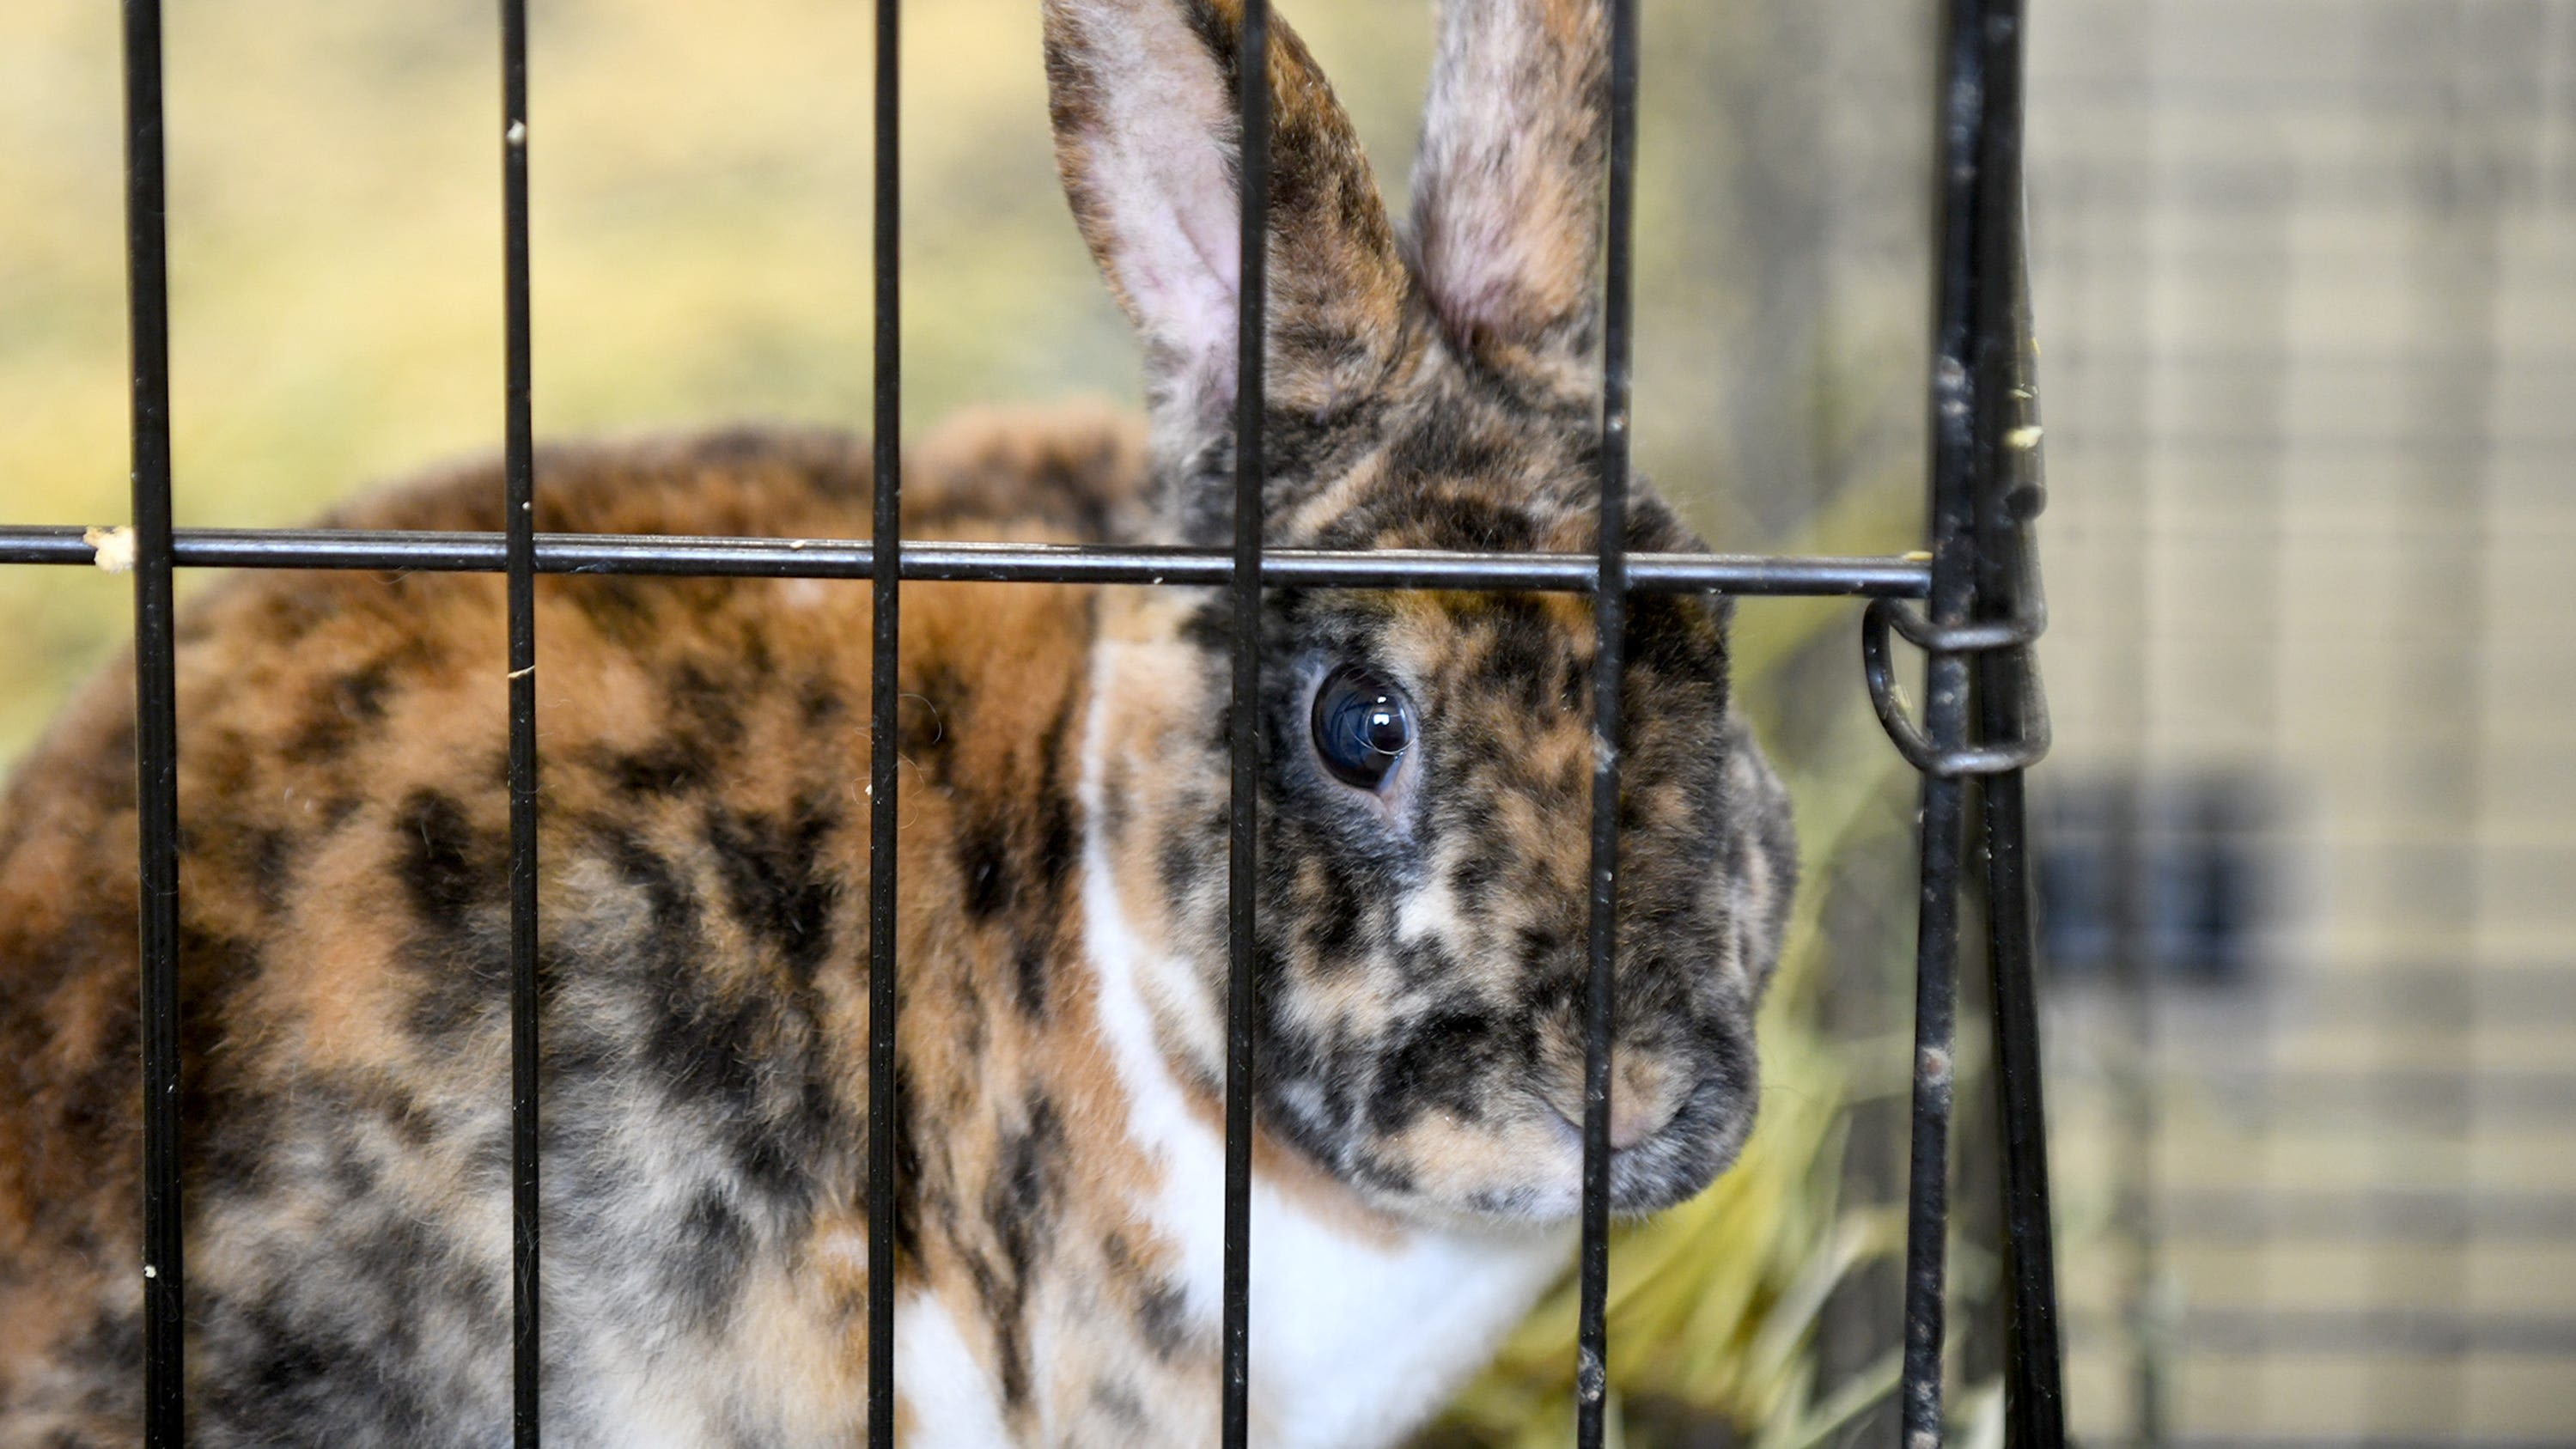 Record number of rabbits removed from Canton home; Stark Humane Society asks for care help